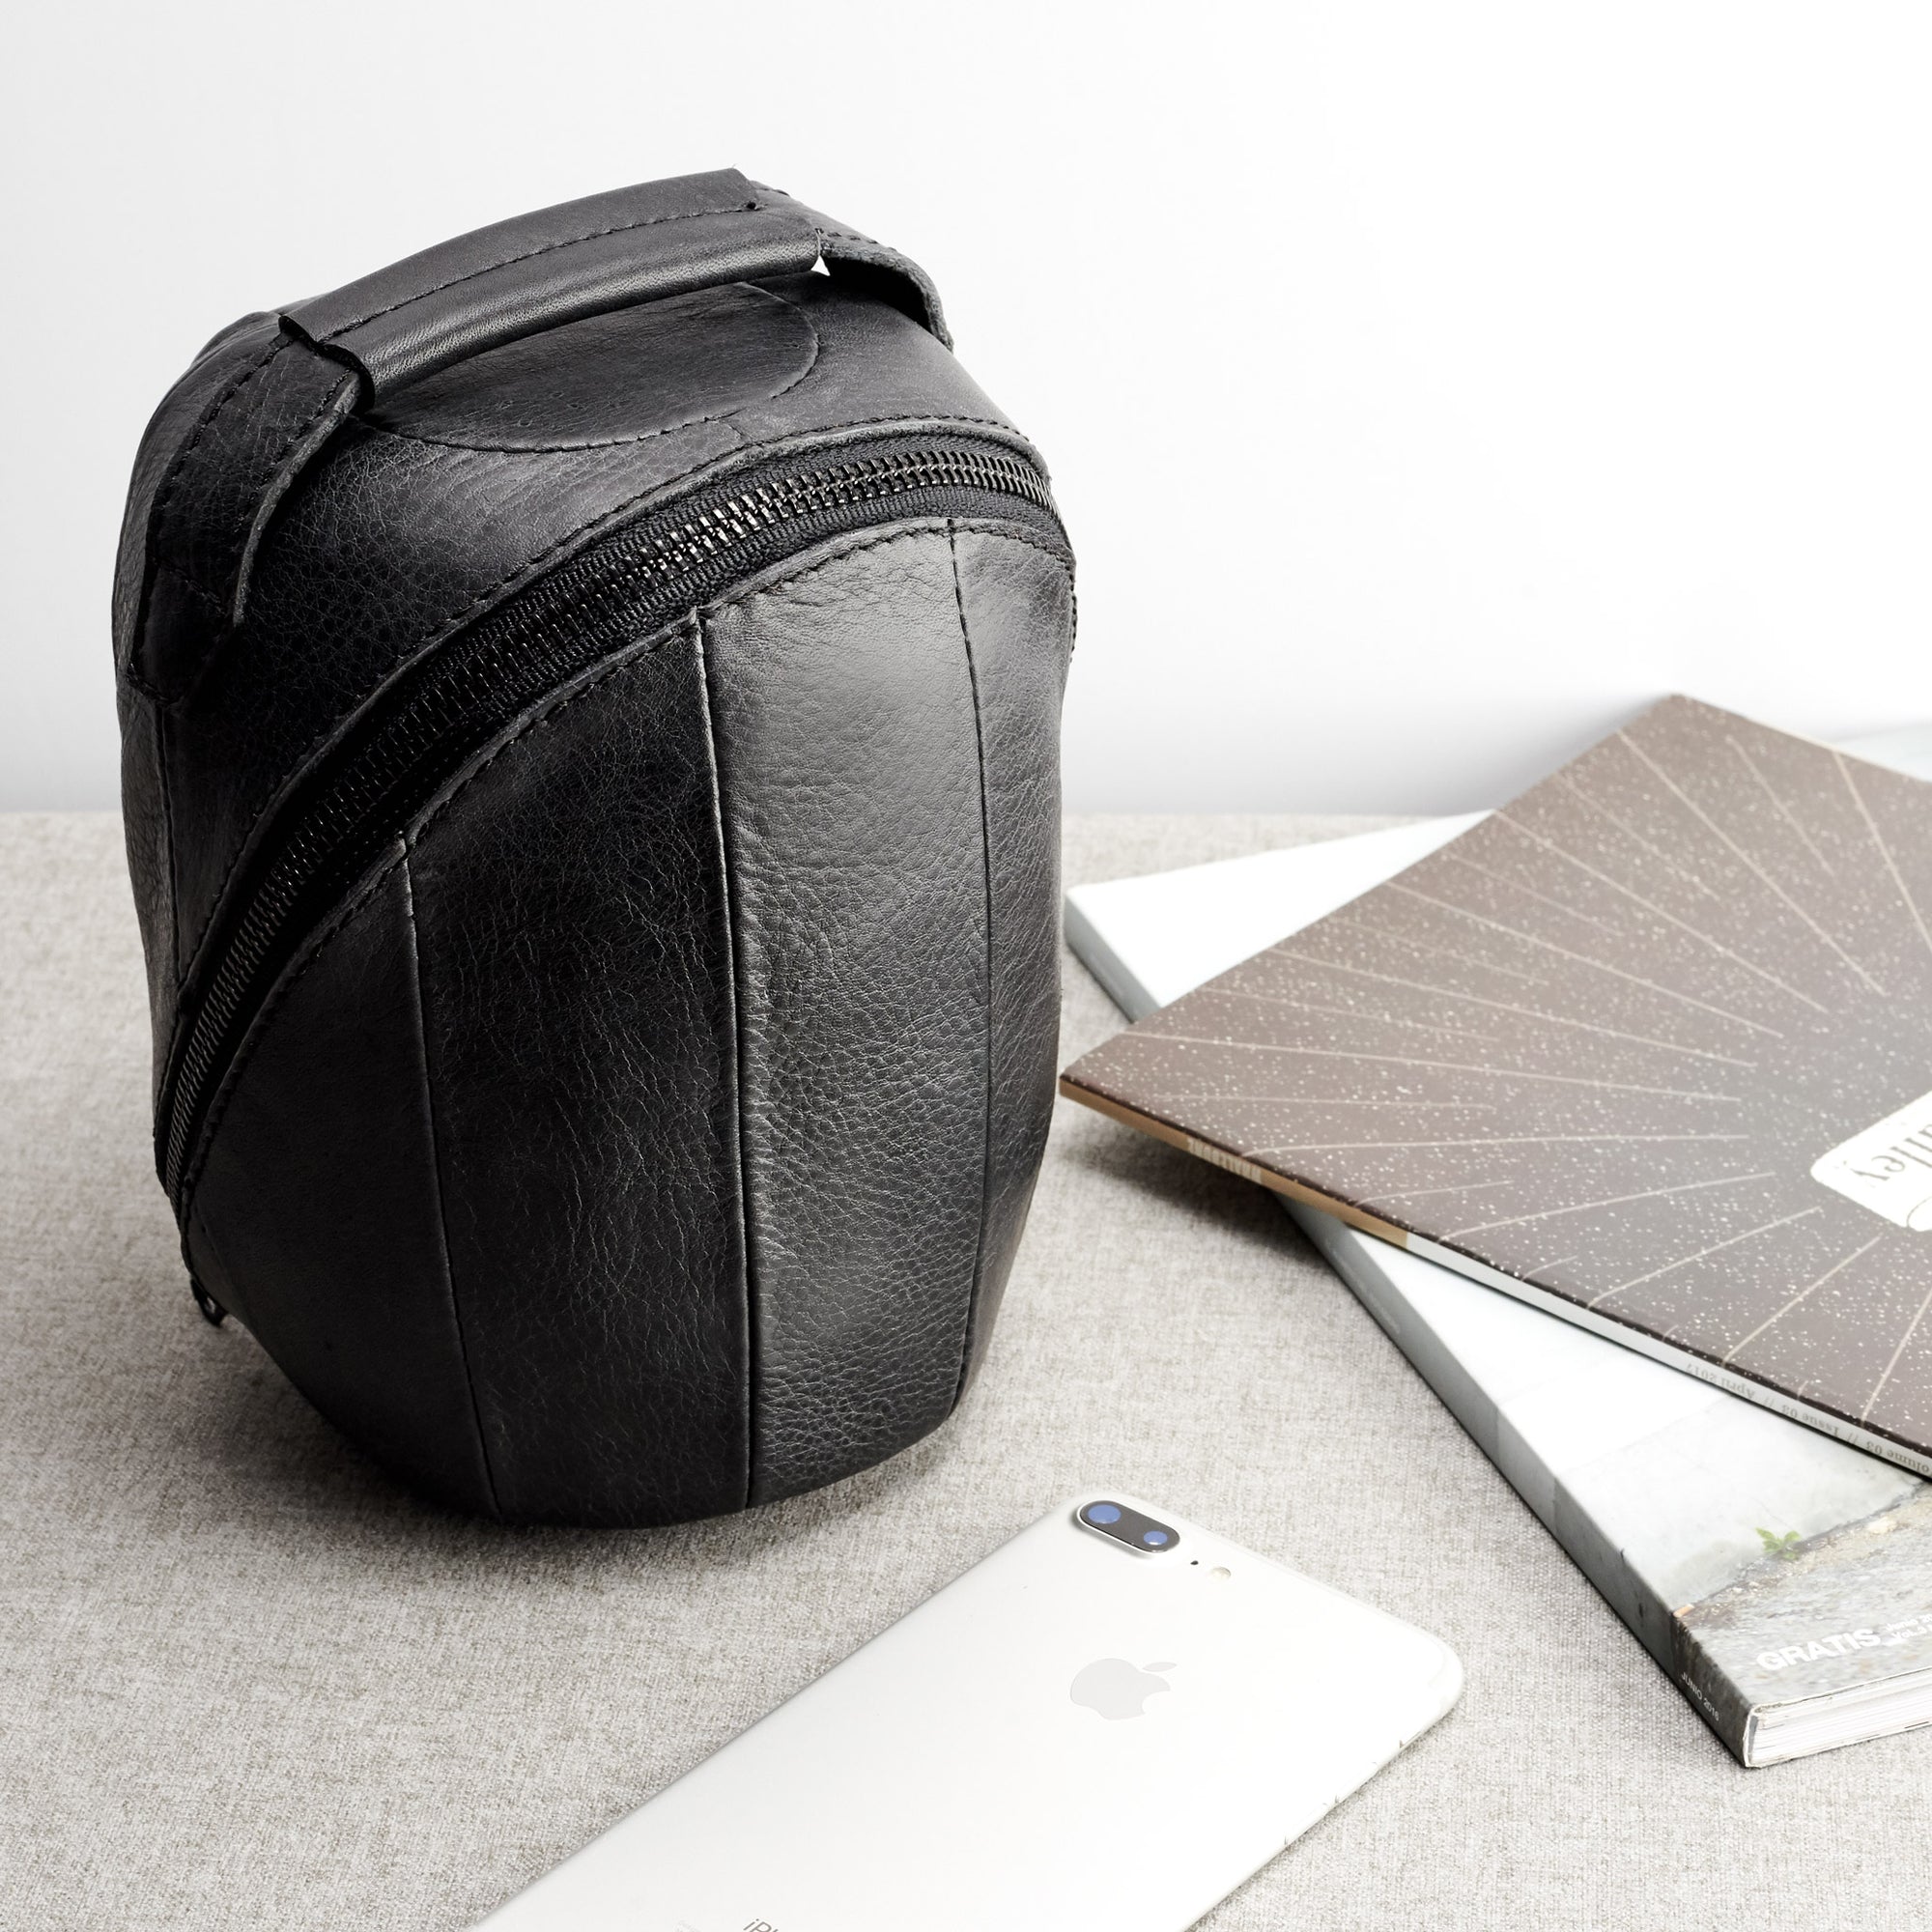 Homepod leather cover, Homepod leather case, Apple accessories, HomePod protector, Travel carrying case, Capra Leather